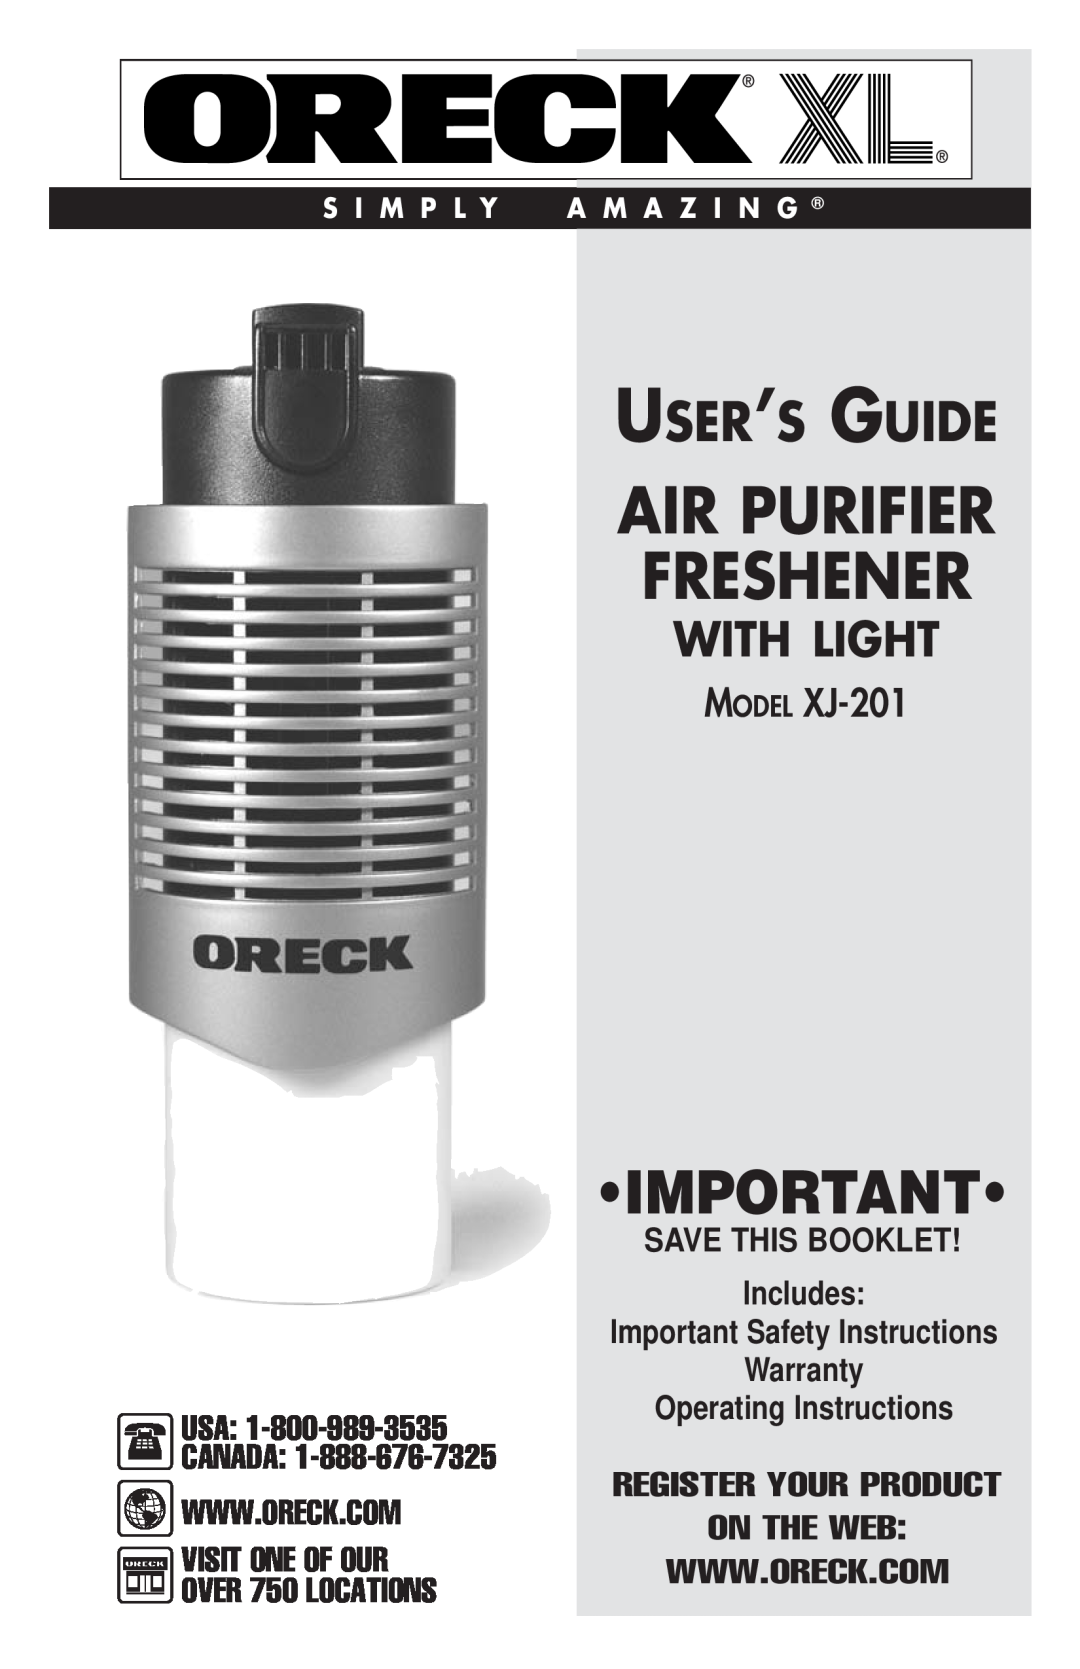 Oreck important safety instructions MODEL XJ-201, VISIT ONE OF OUR OVER 750 LOCATIONS, Air Purifier Freshener 